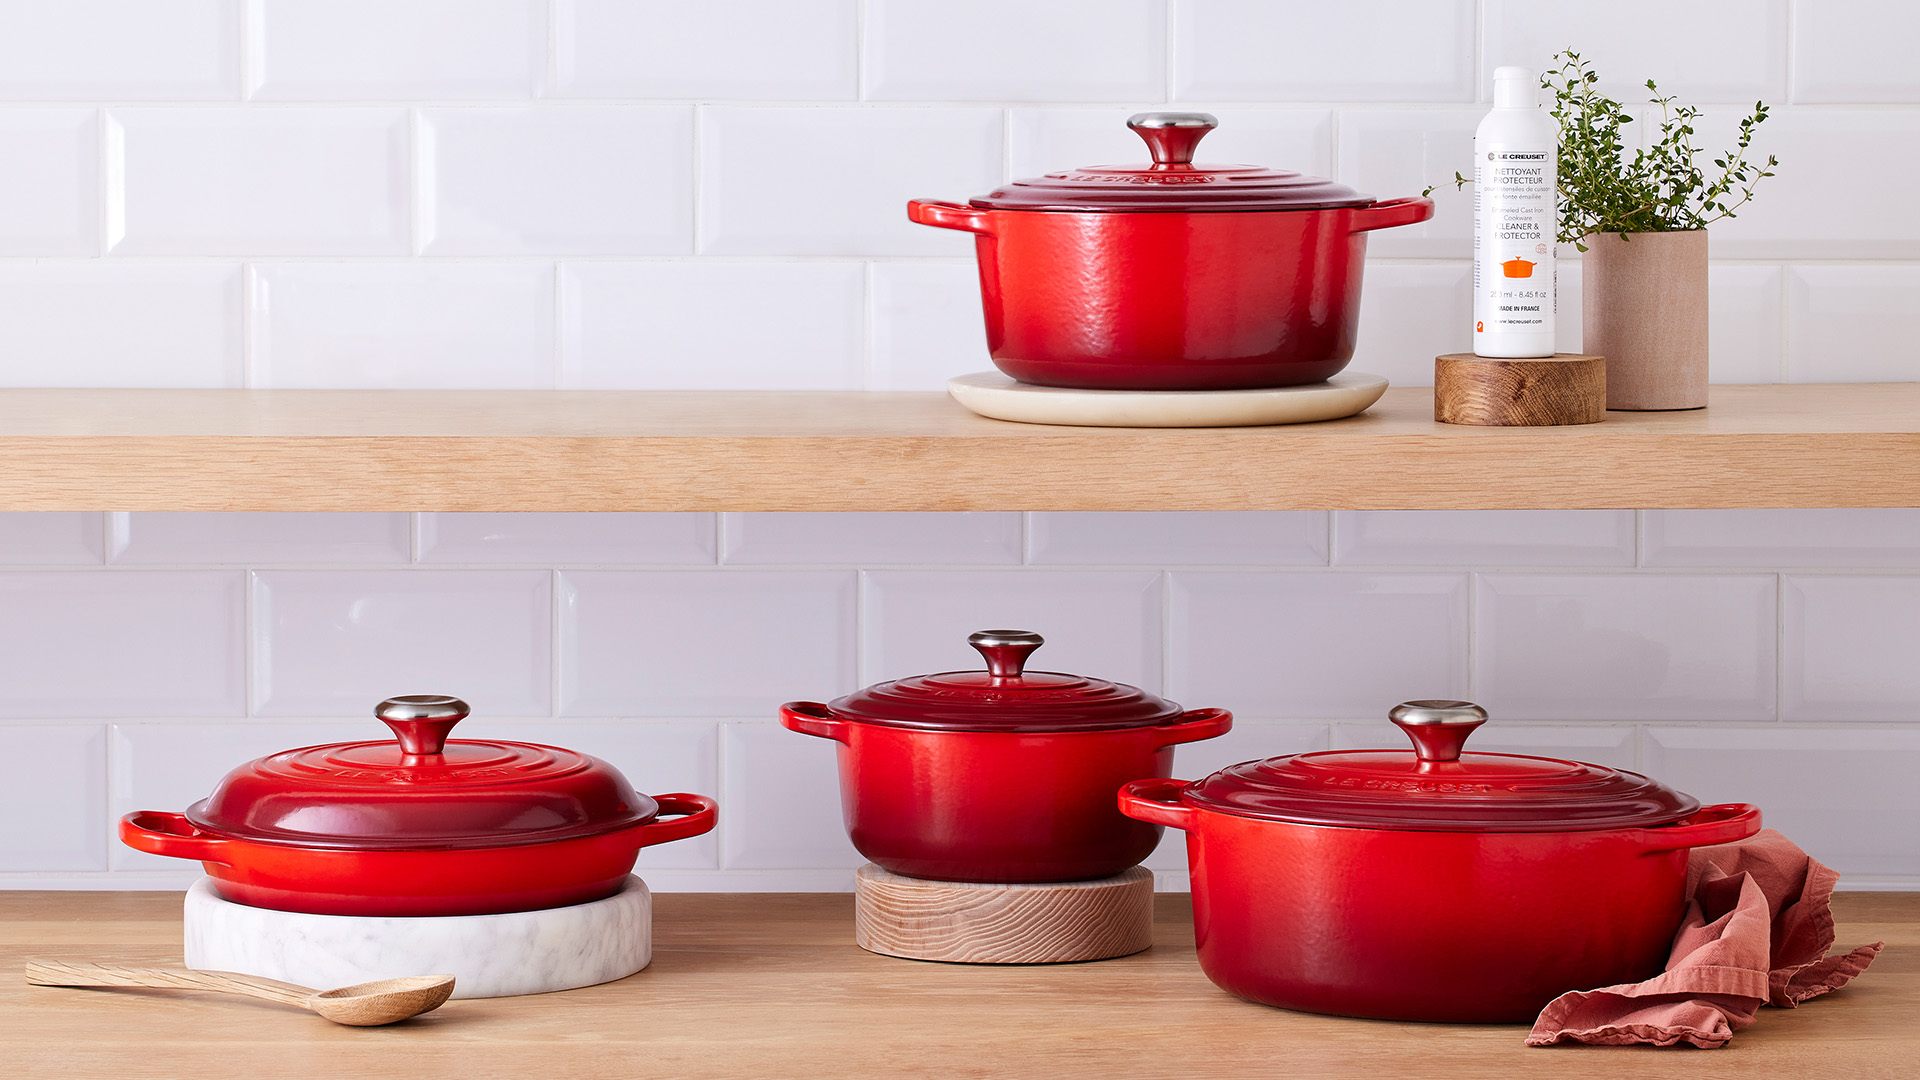 Pentola in ghisa Le Creuset Cocotte cuore